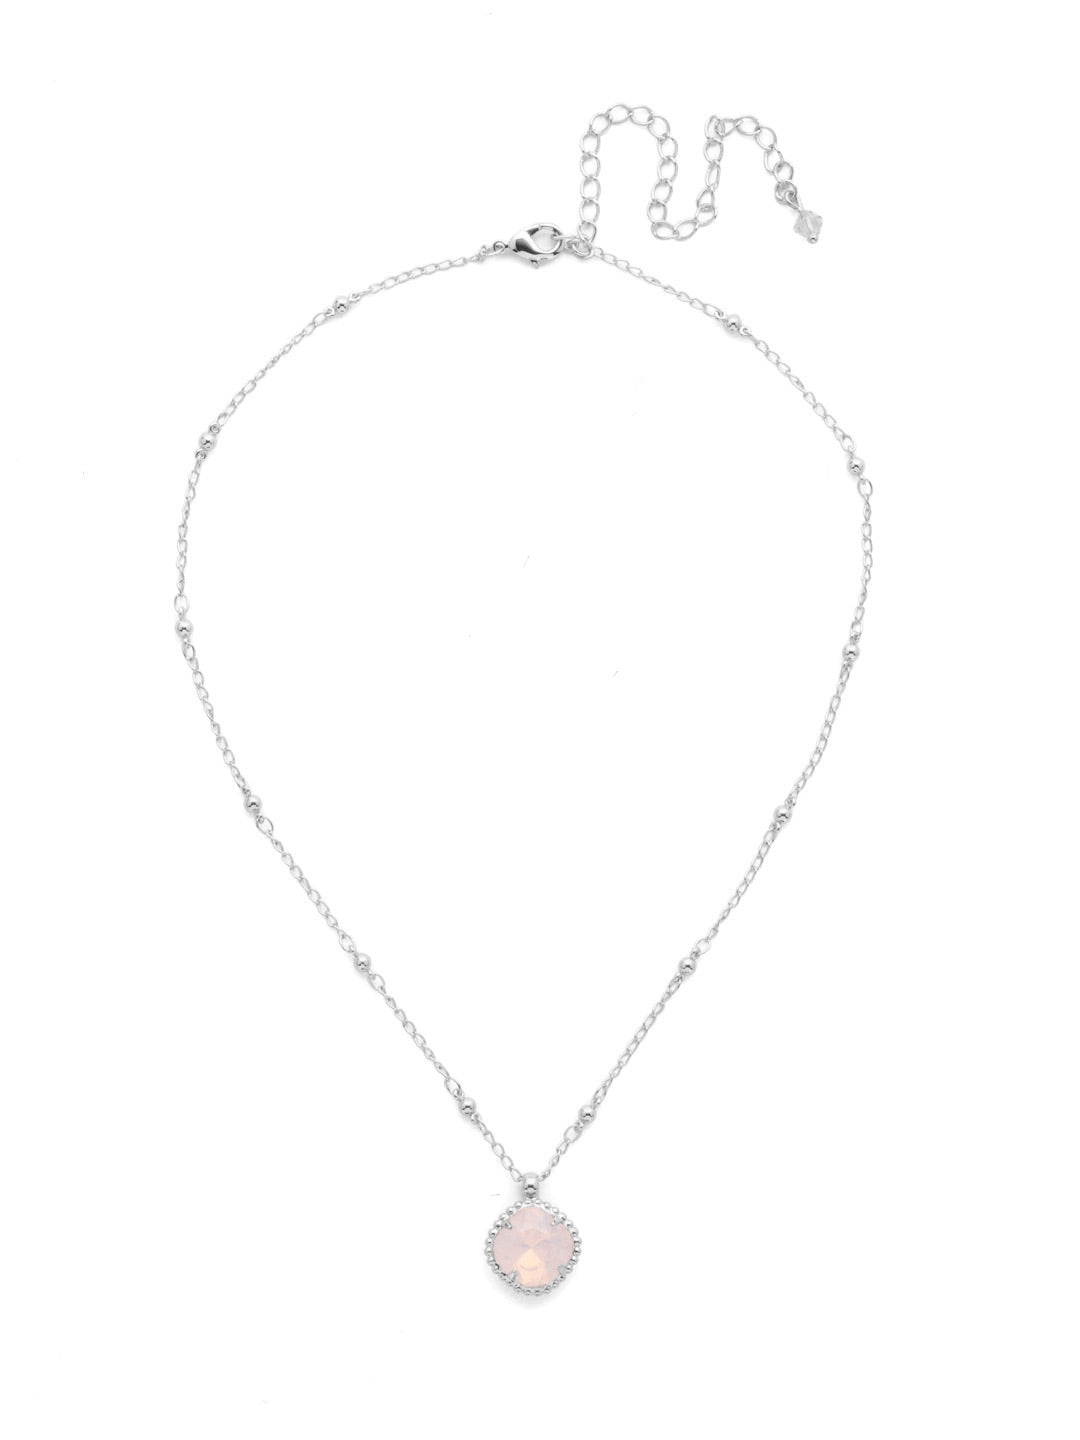 Cushion-Cut Pendant Necklace - NDS50PDROW - <p>Elevate your jewelry collection with this artisanally handcrafted pendant necklace. The solitaire 12mm cushion cut crystal is surrounded by a beautifully scalloped edge, creating a unique and eye-catching design. The little ball details along the chain add a touch of character. This adjustable necklace features a 16 inch chain with a 4 inch extension, complete with a delicate charm, for a versatile fit. Whether you're looking for a special gift or a treat for yourself, this handcrafted necklace is a stylish and timeless choice. From Sorrelli's Rose Water collection in our Palladium finish.</p>